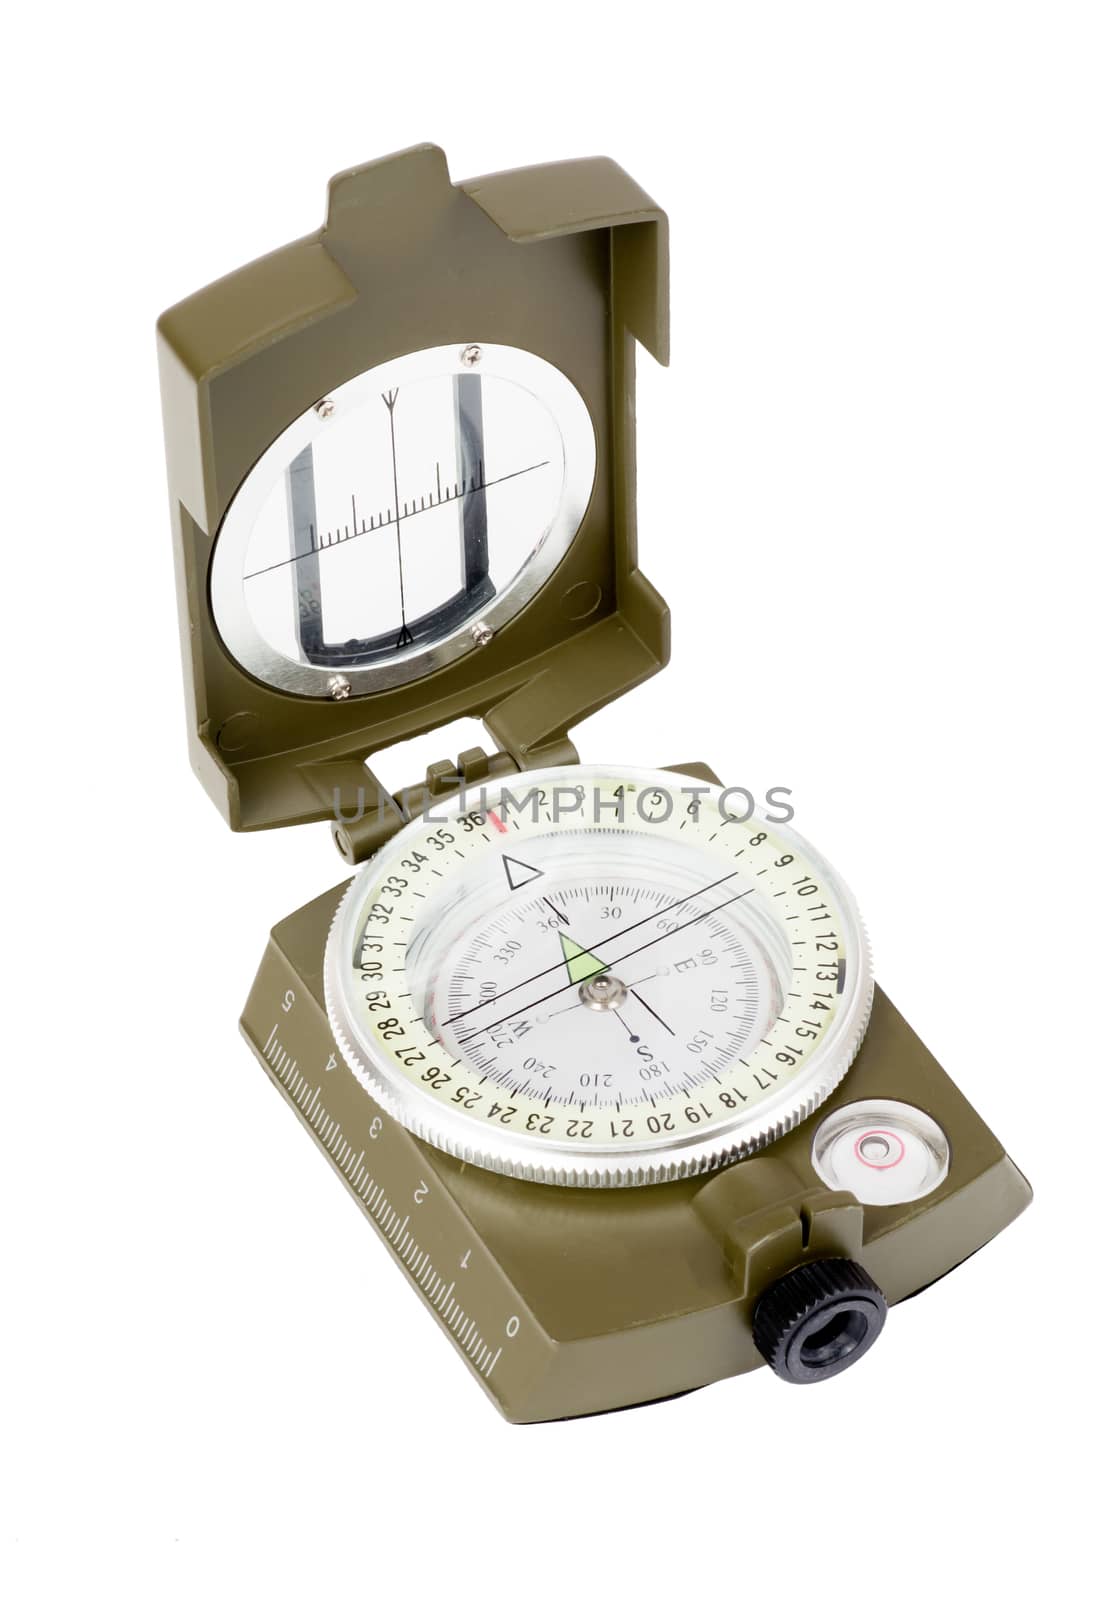 Vintage compass on white by cherezoff